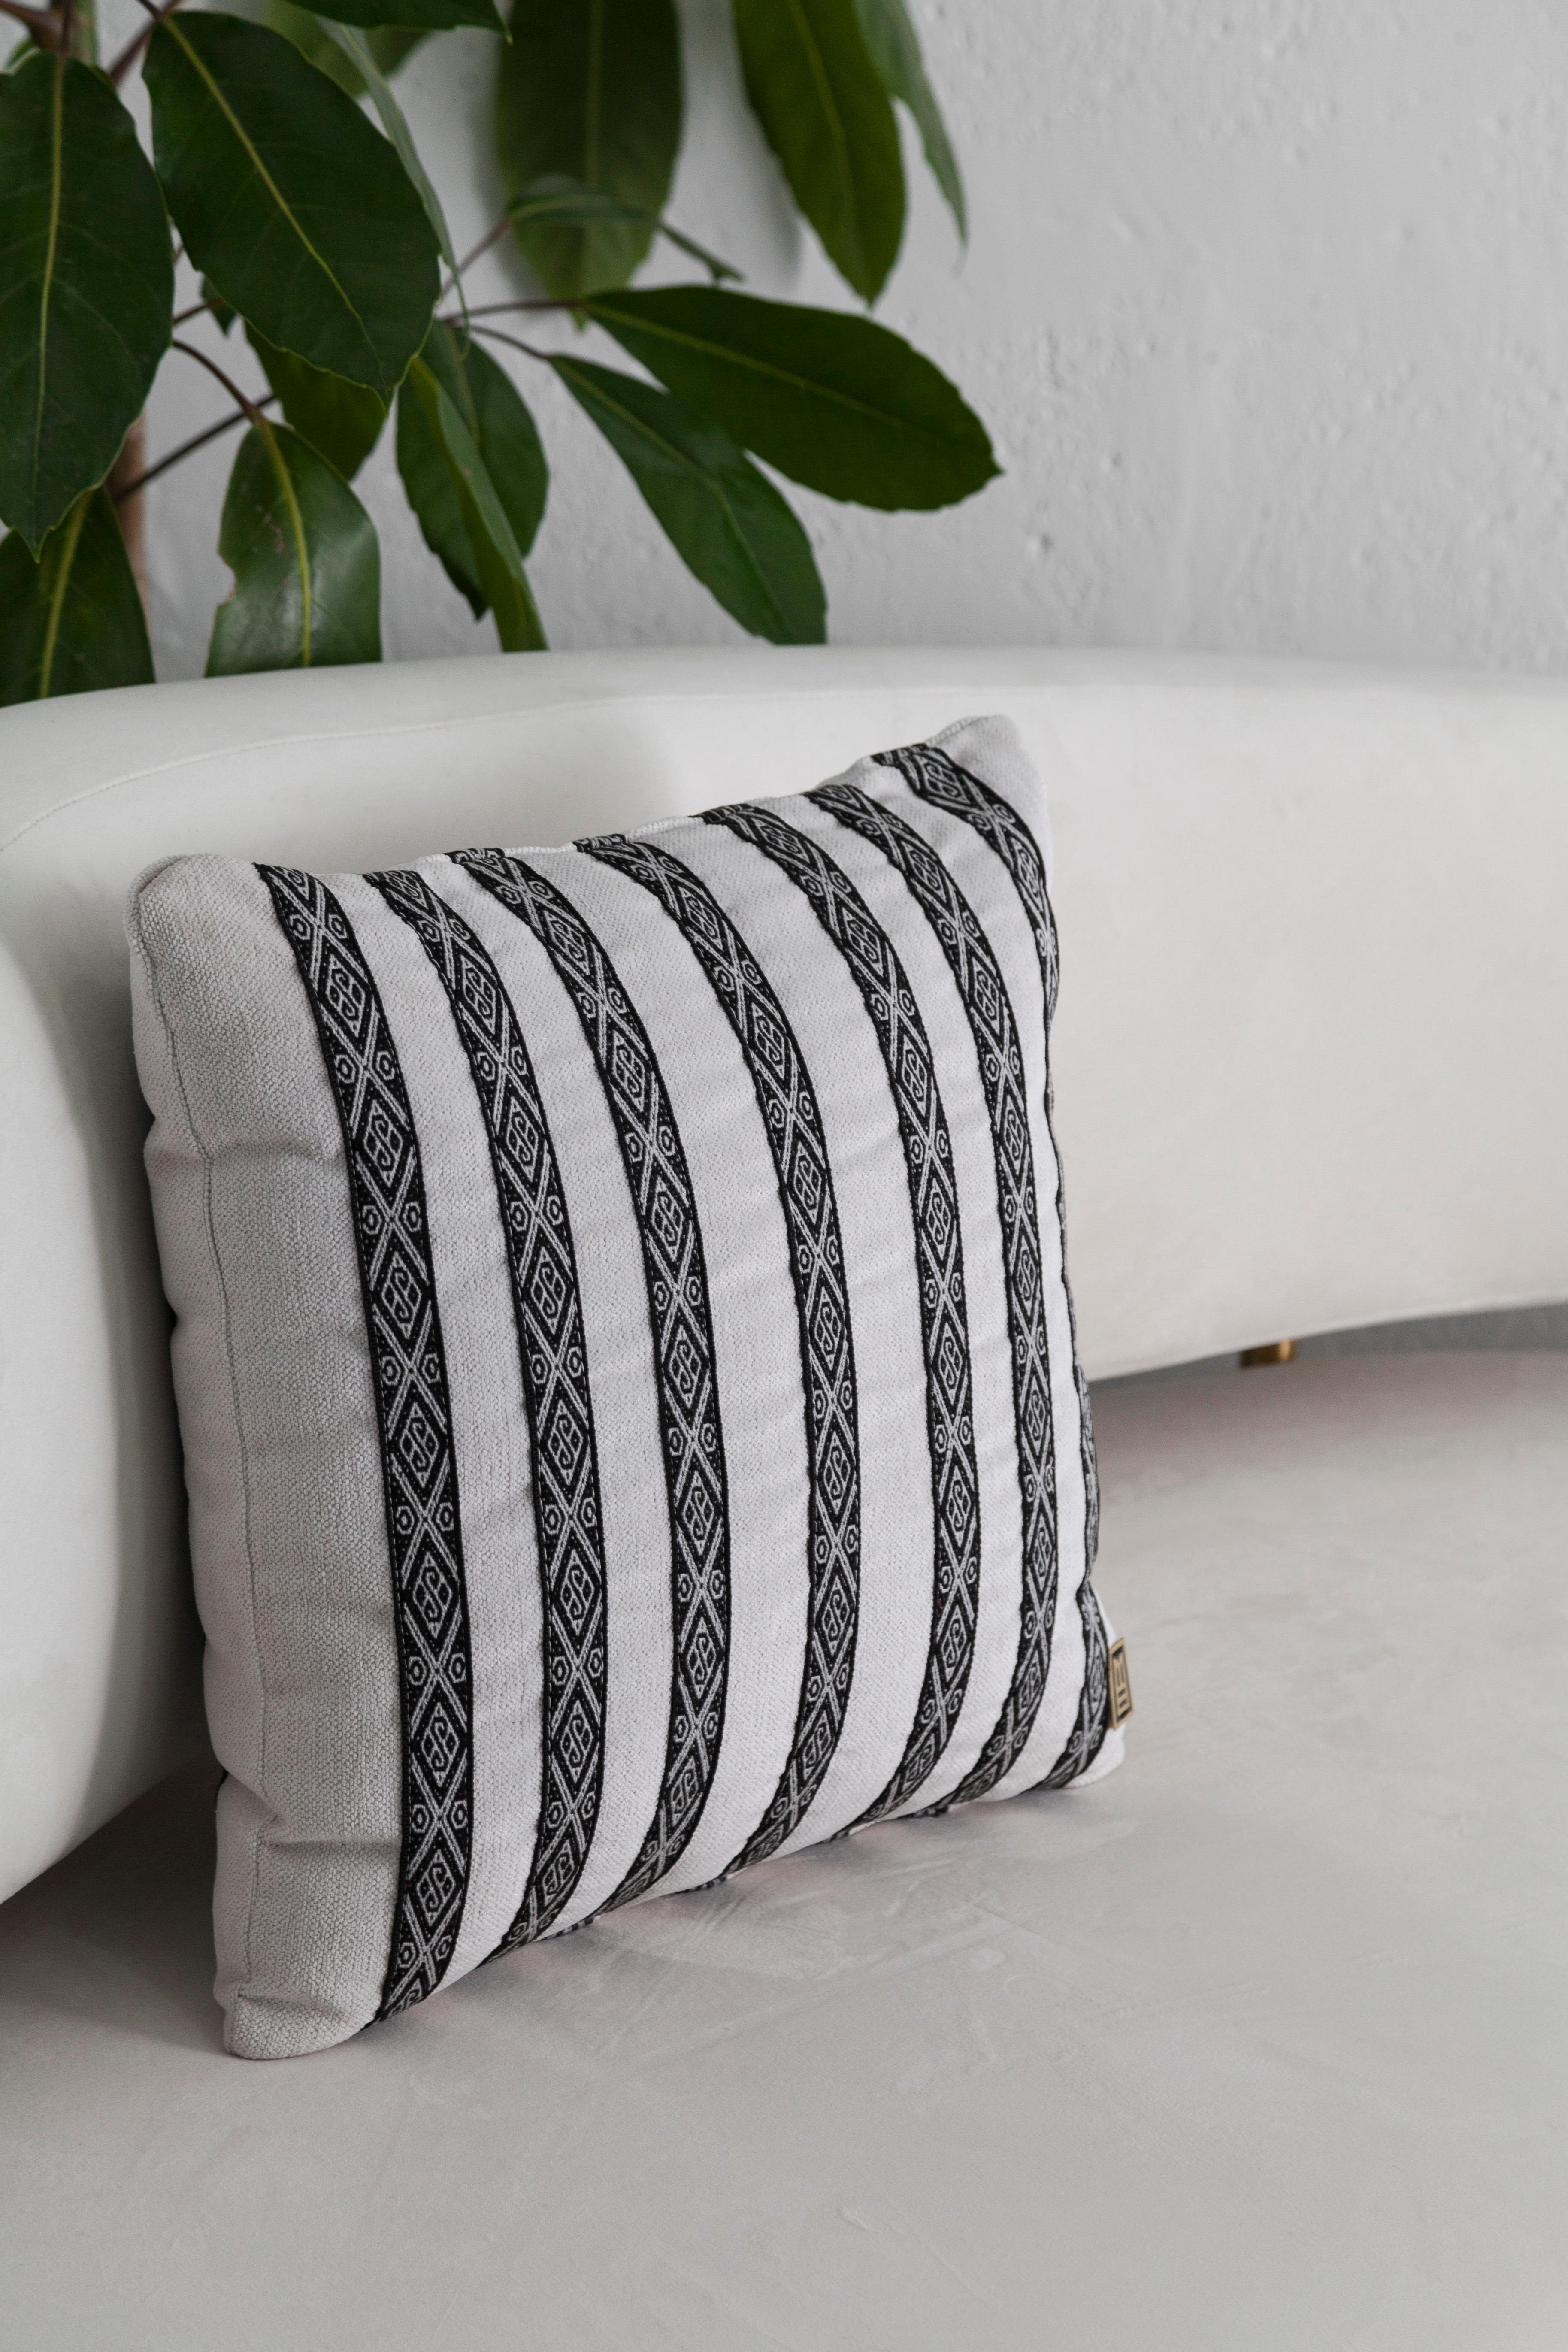 Ecuadorean FAJAS Handwoven Artisanal Sash Pillow in Ivory Upholstery by ANDEAN, In Stock